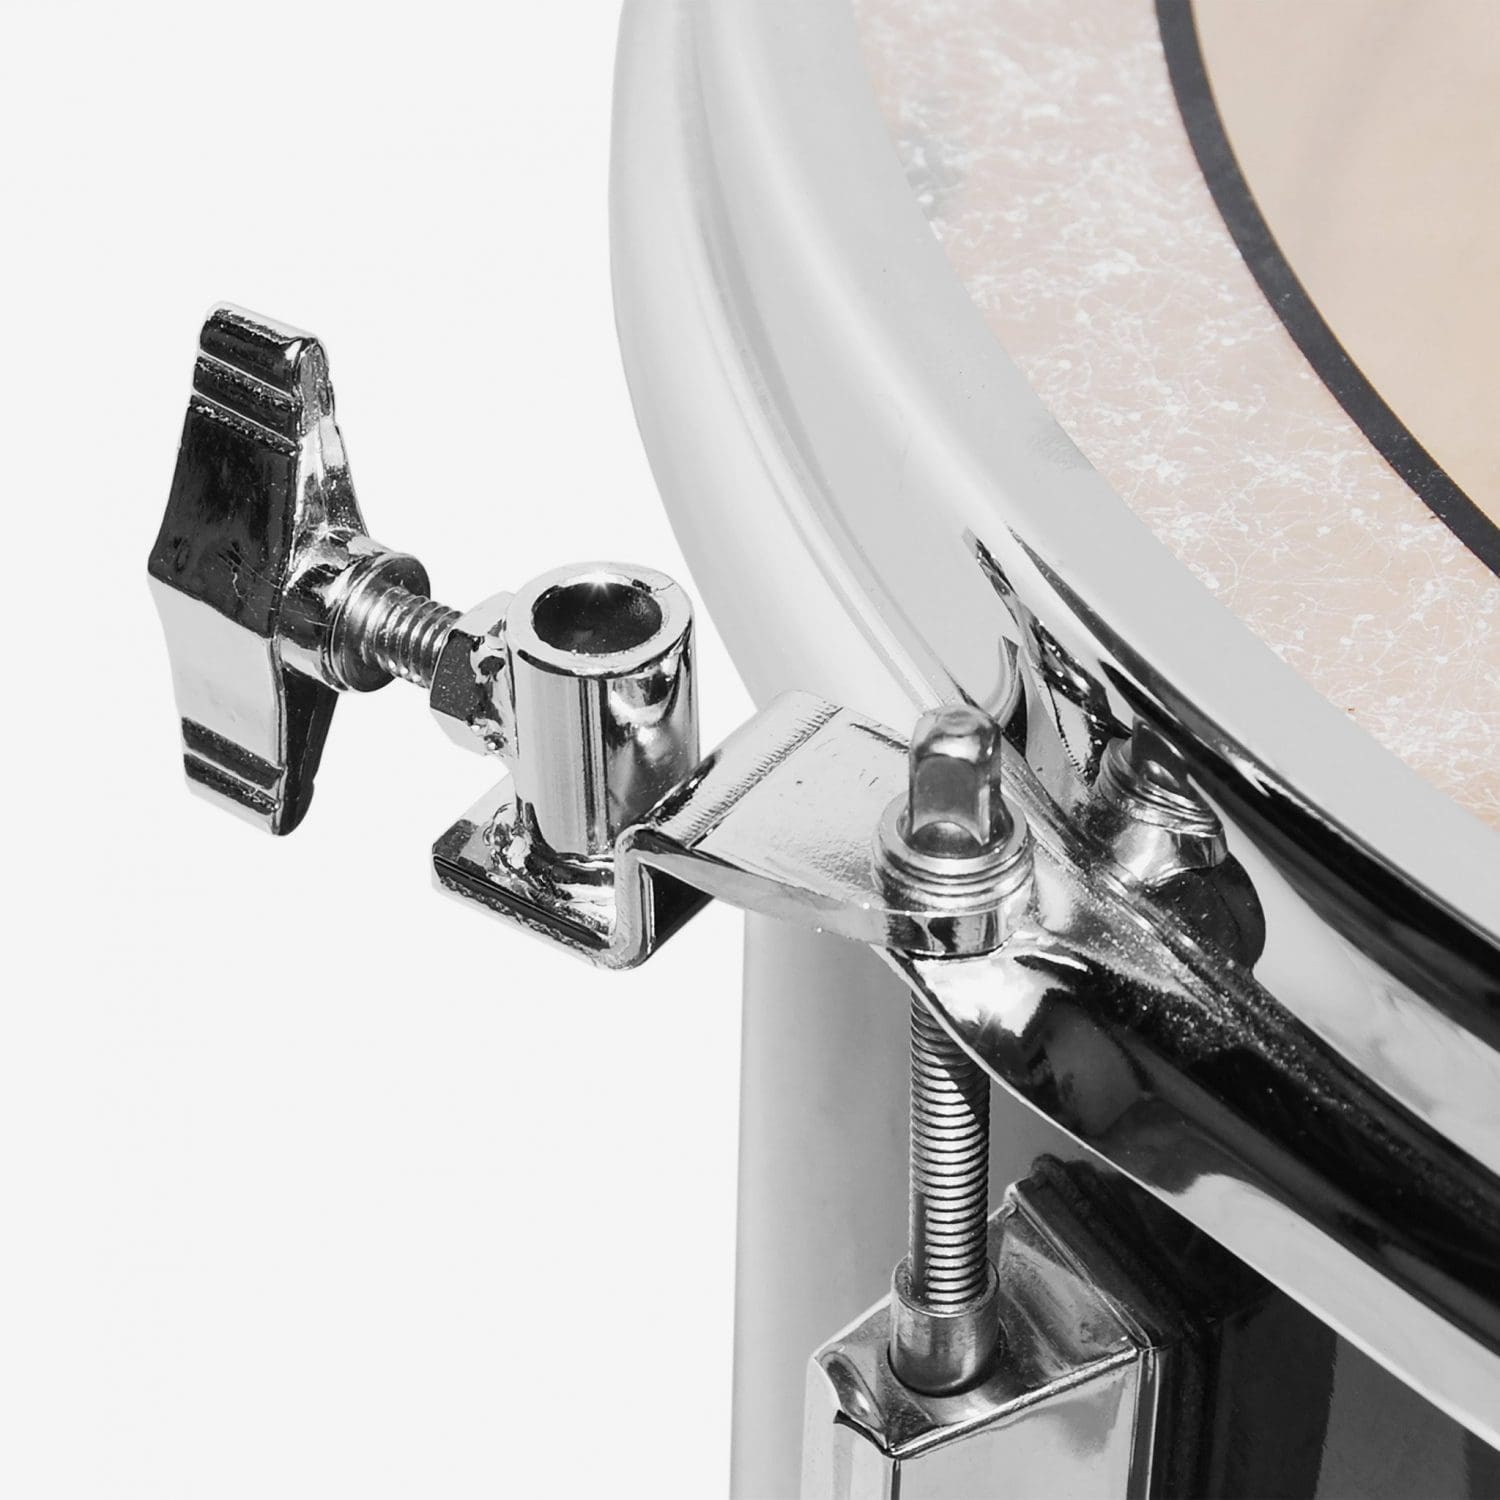 Tom/Snare Microphone Mount